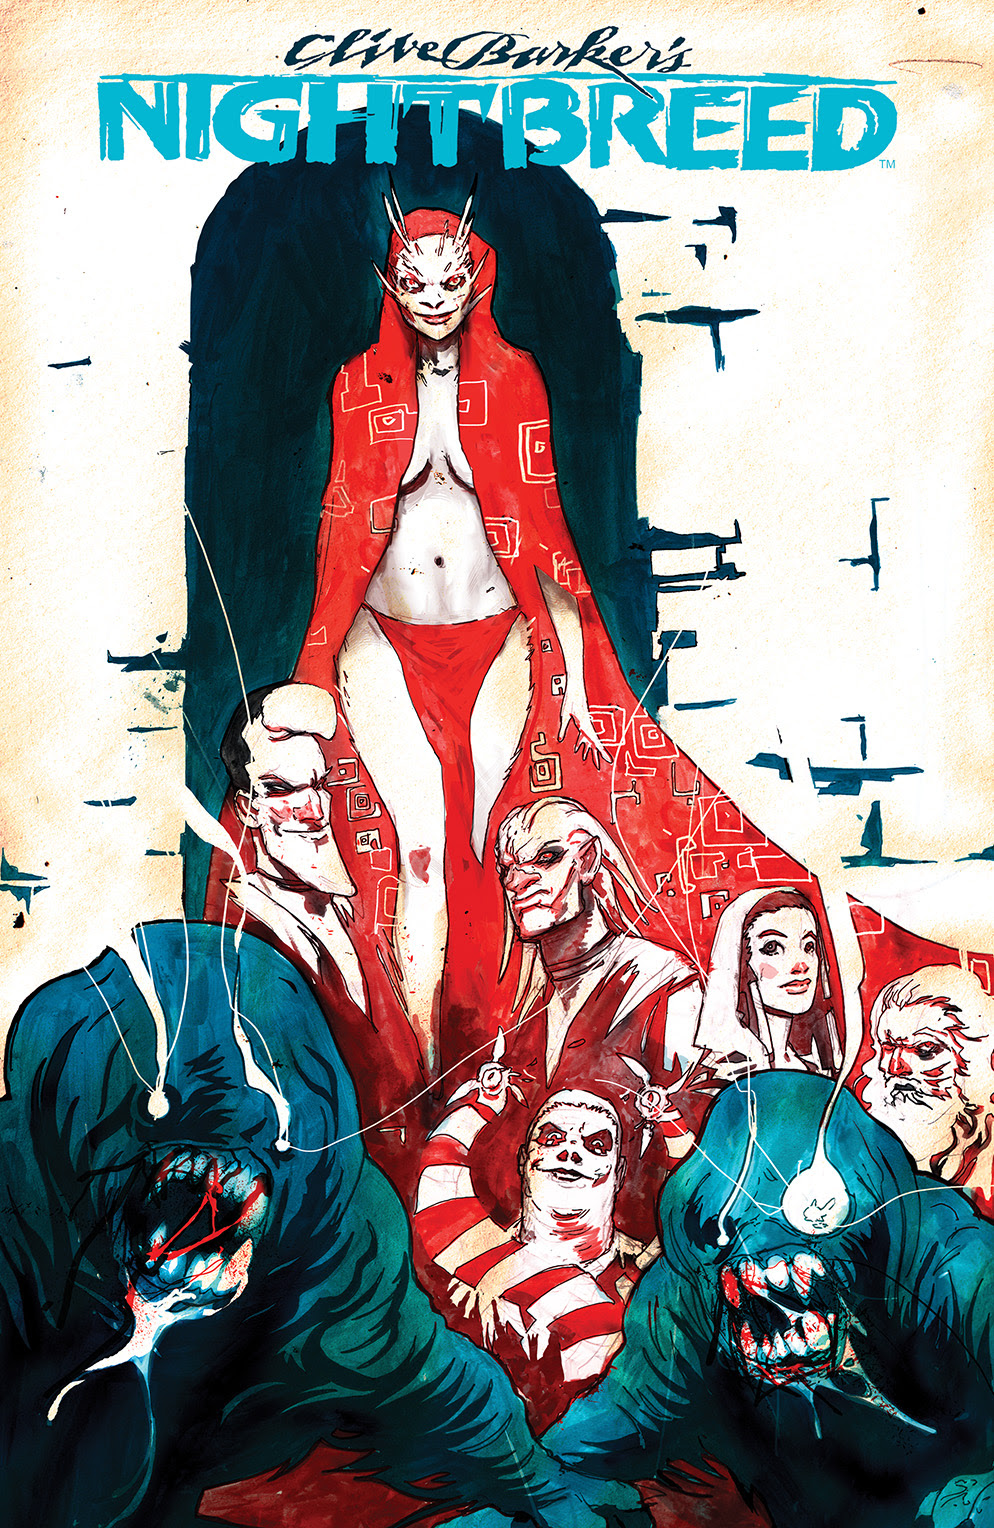 CLIVE BARKER'S NIGHTBREED #4 Cover A by Riley Rossmo